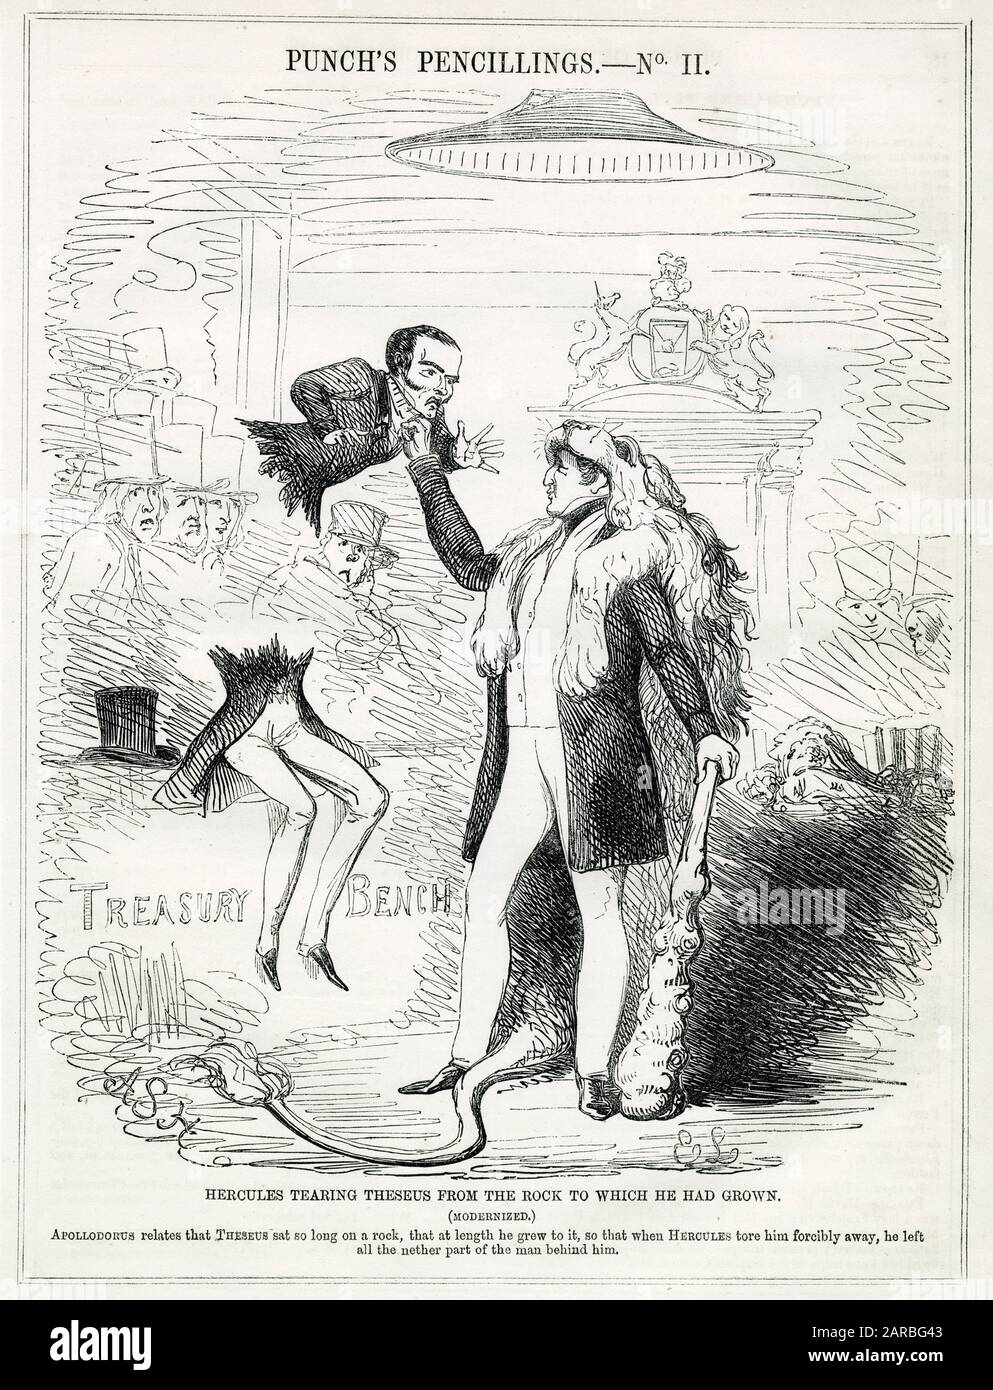 1841 Punch Cartoon 2 Hercules Tearing Theseus from the Treasury Bench 